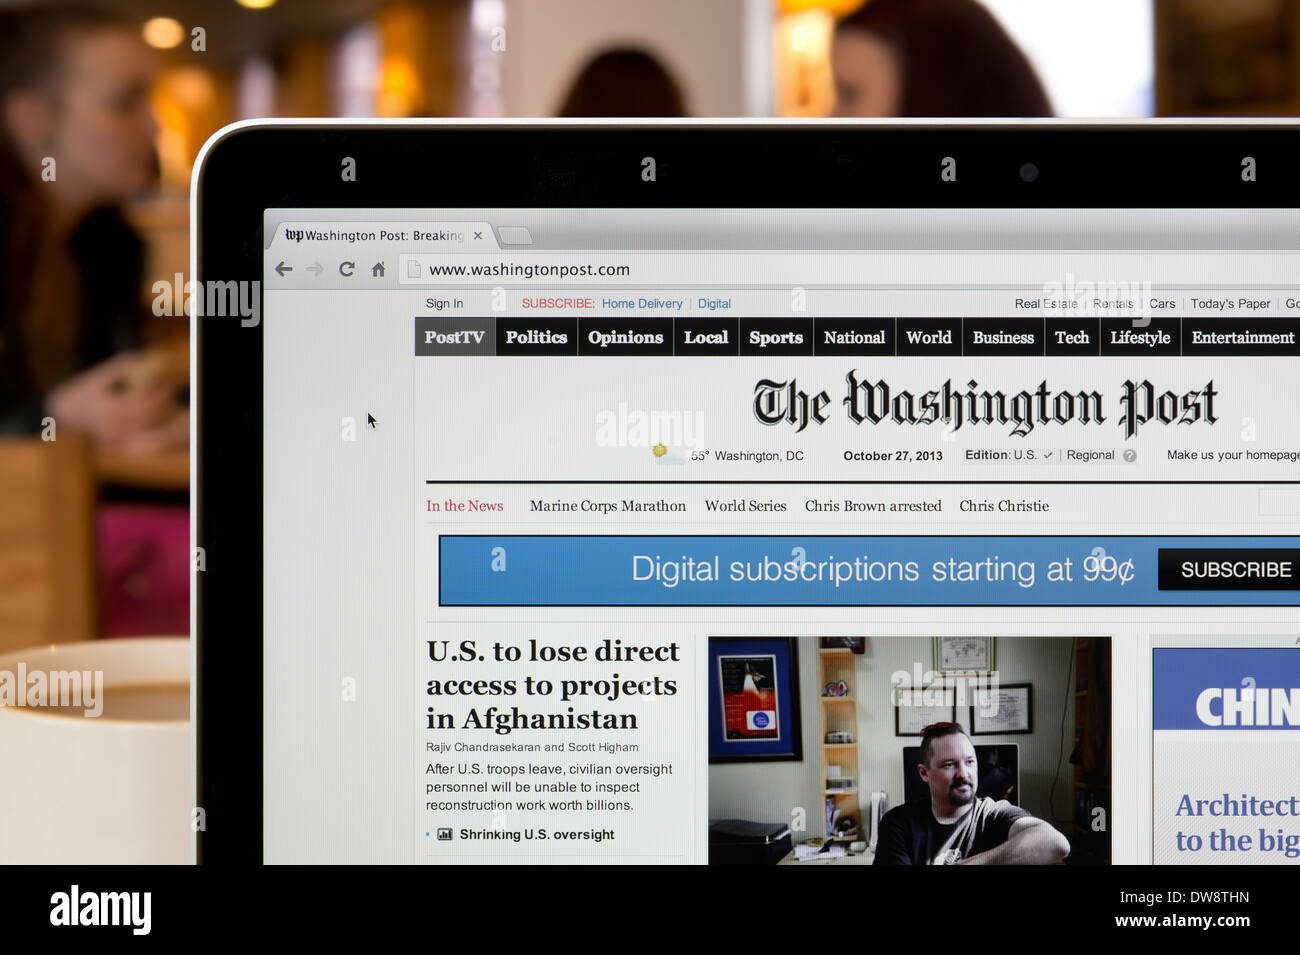 The Washington Post website shot in a coffee shop environment (Editorial use only: print, TV, e-book and editorial website). Stock Photo